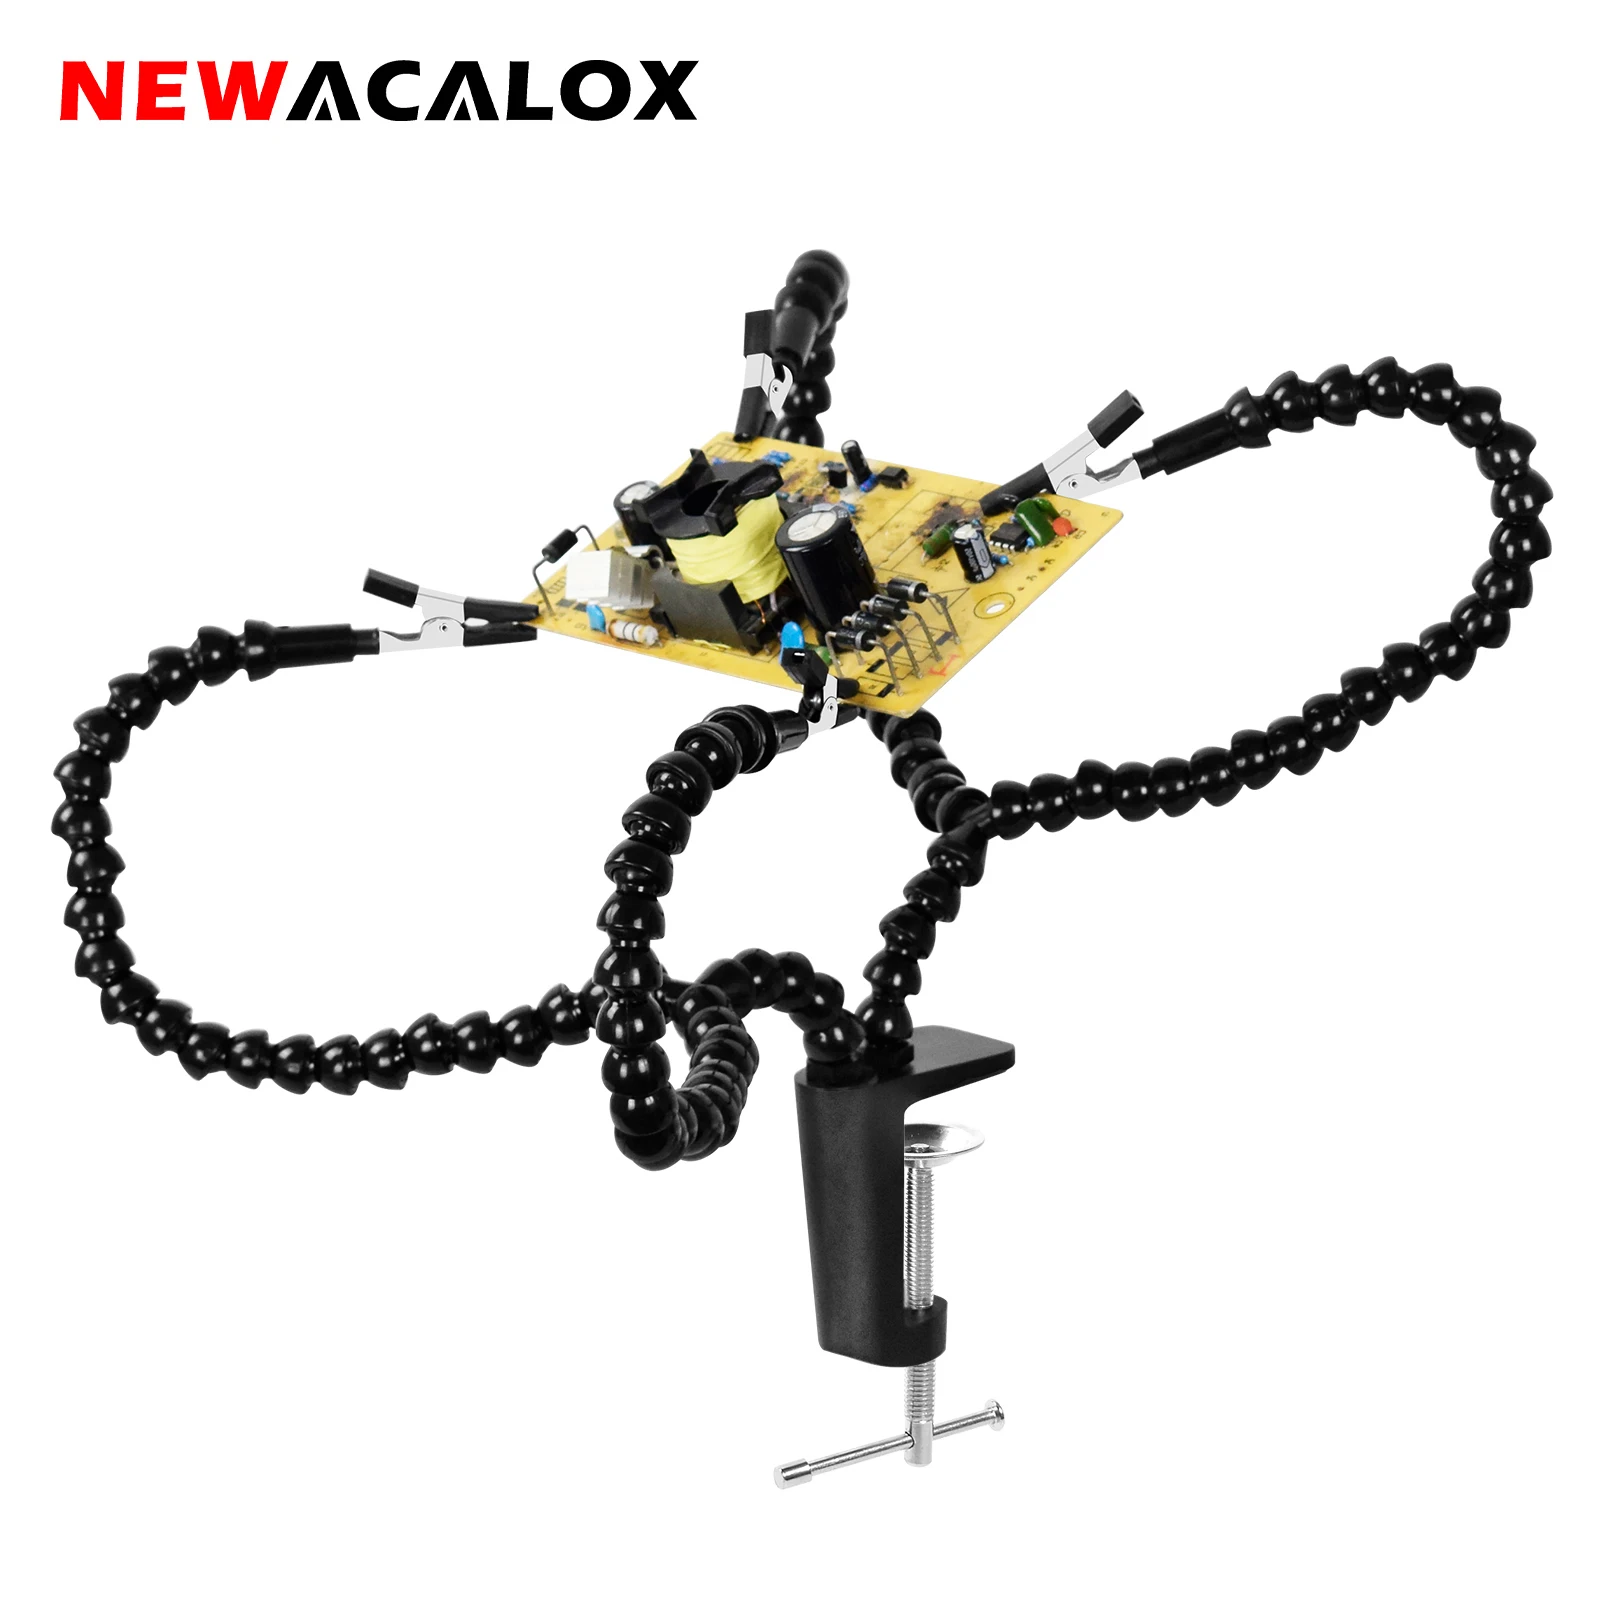 NEWACALOX 4 Pcs Flexible Arm Helping Hands Third Hand Soldering Tool PCB Holder  Welding Stand for PCB Repairing Circuit Board adjustable pcb holder printed circuit board jig fixture soldering stand clamp repair tool for soldering repair 360 rotation